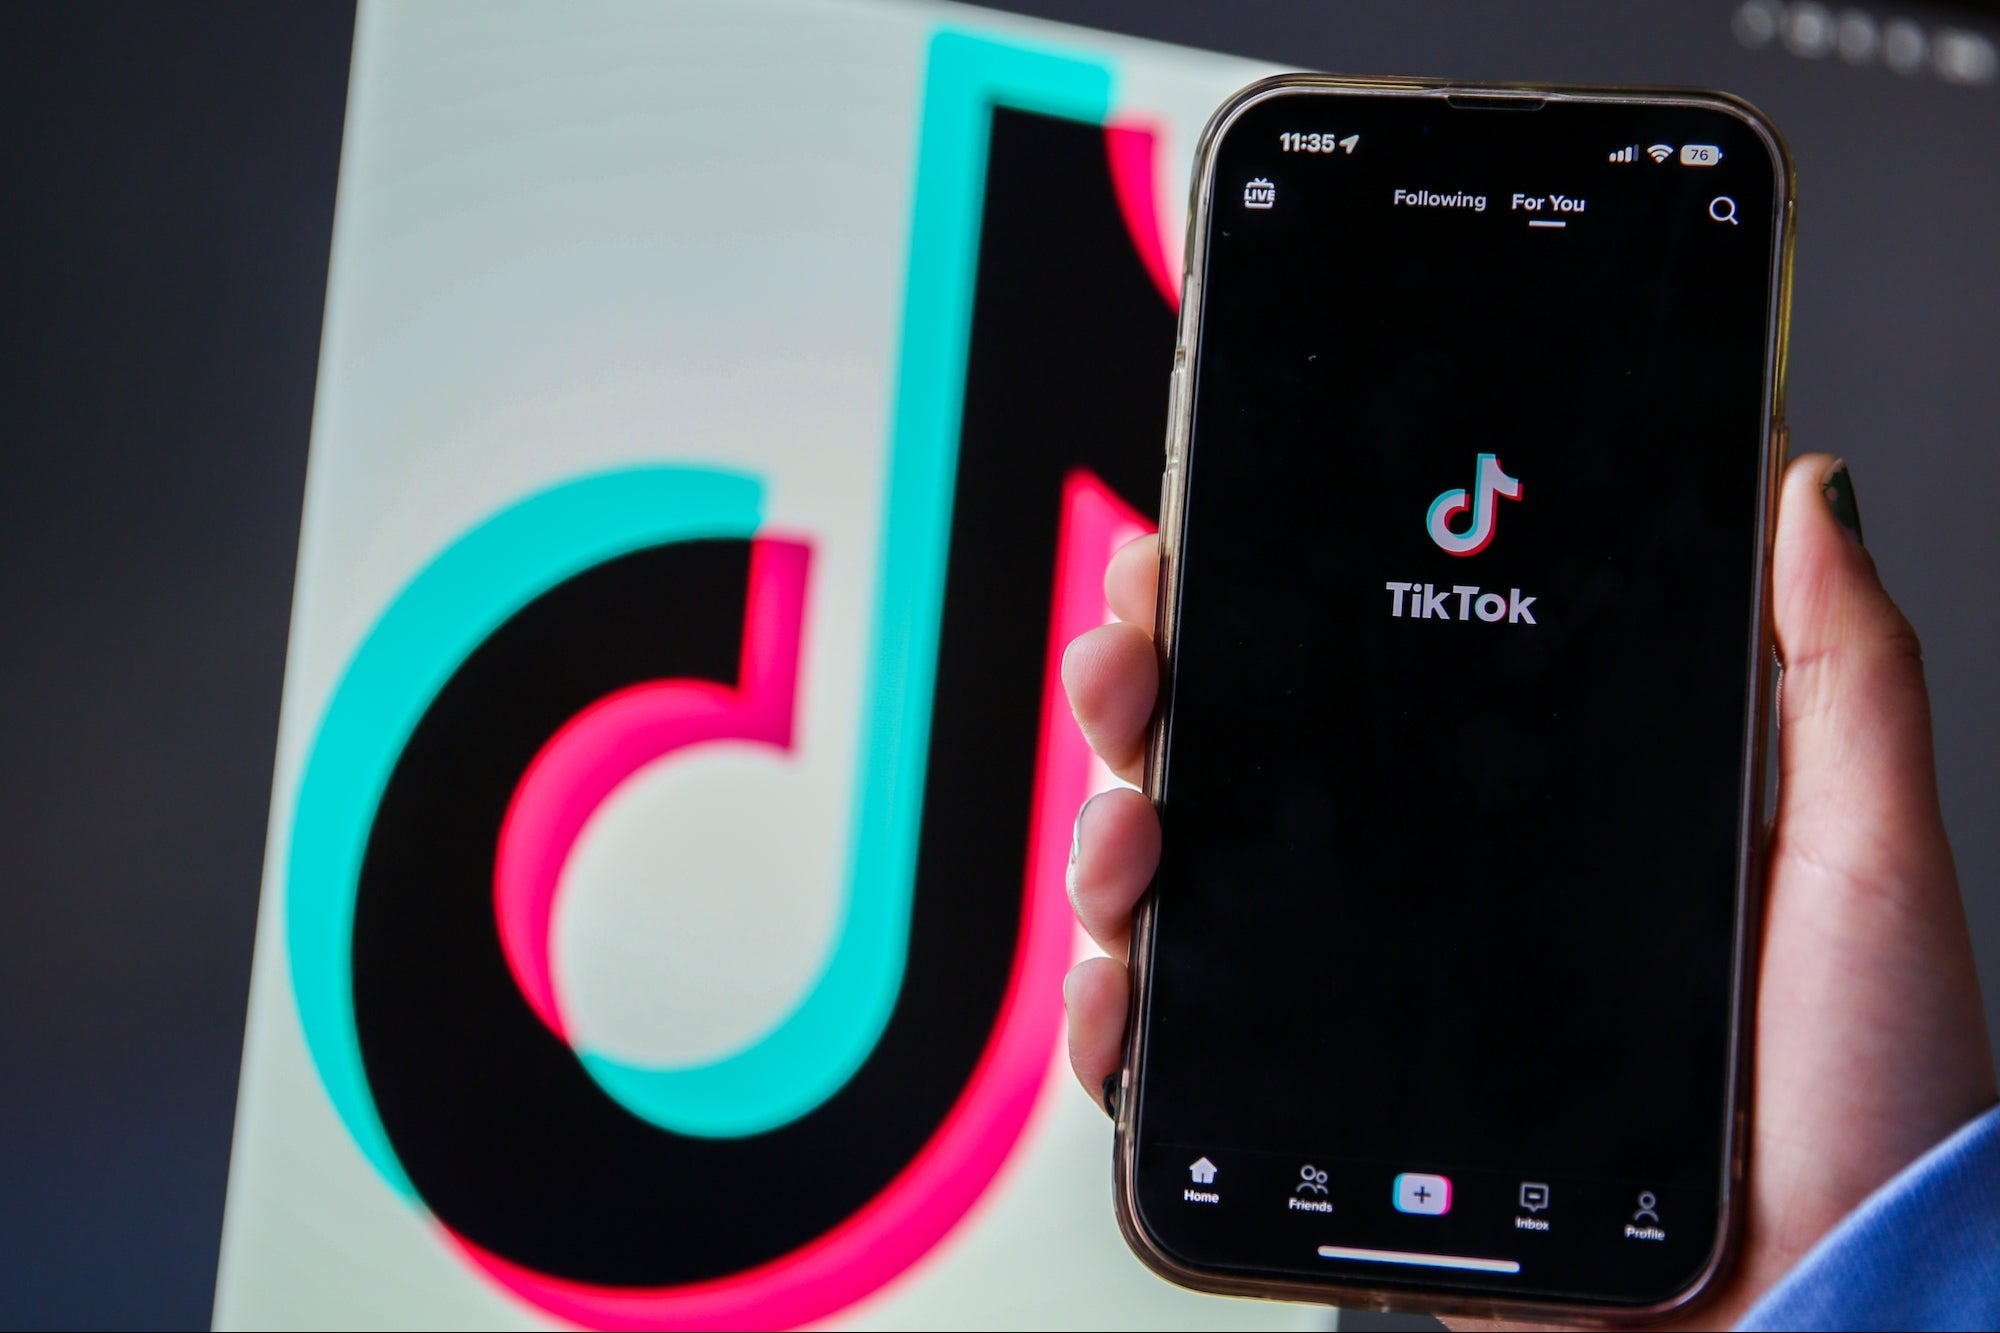 Why Is the U.S. Threatening to Ban China-Owned TikTok?